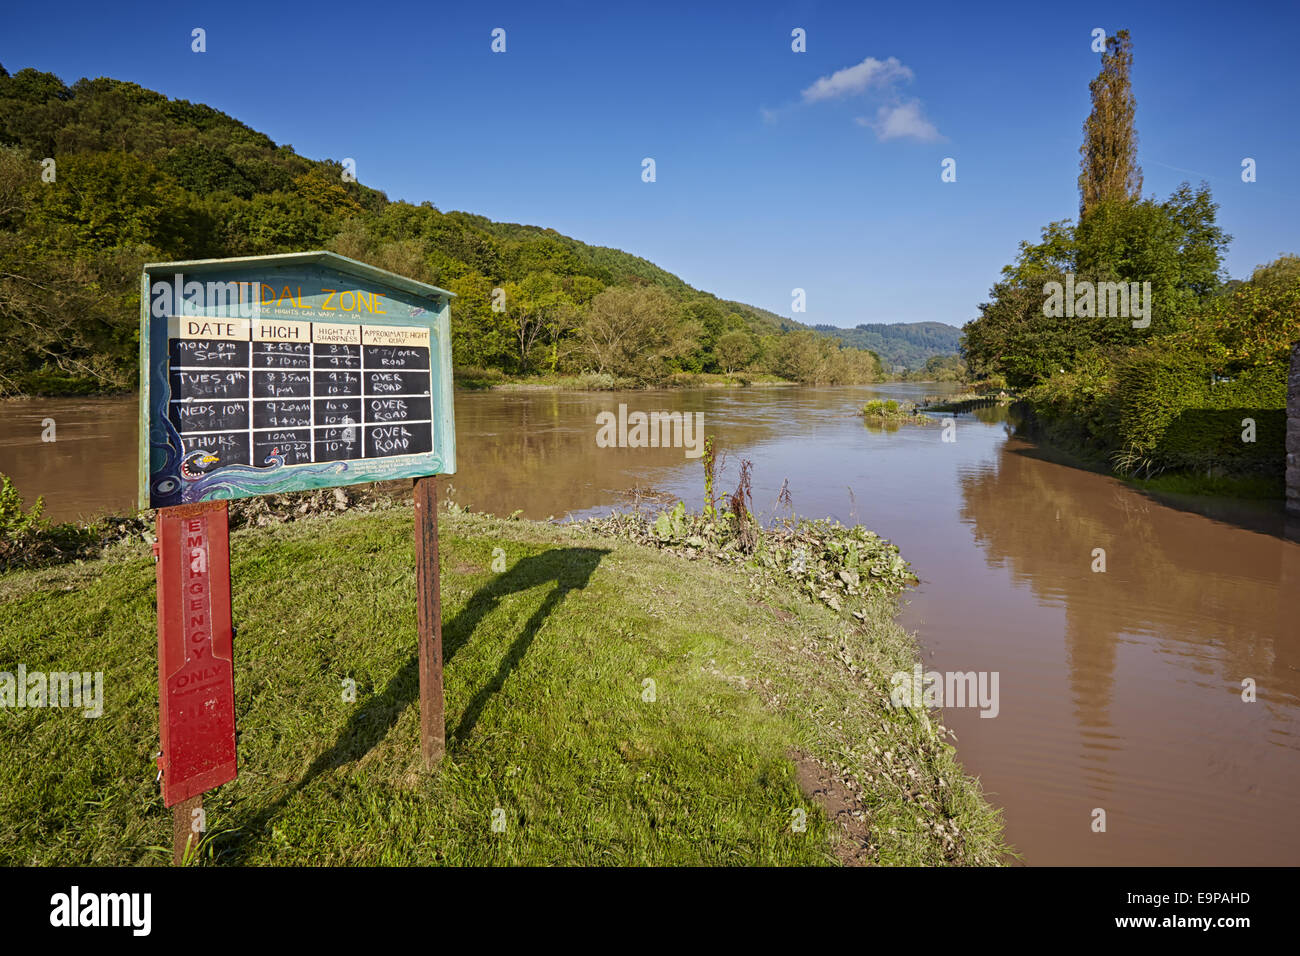 'Tidal Zone' information board, with high tide causing flooding, Brockweir, River Wye, Forest of Dean, Gloucestershire, England, September Stock Photo